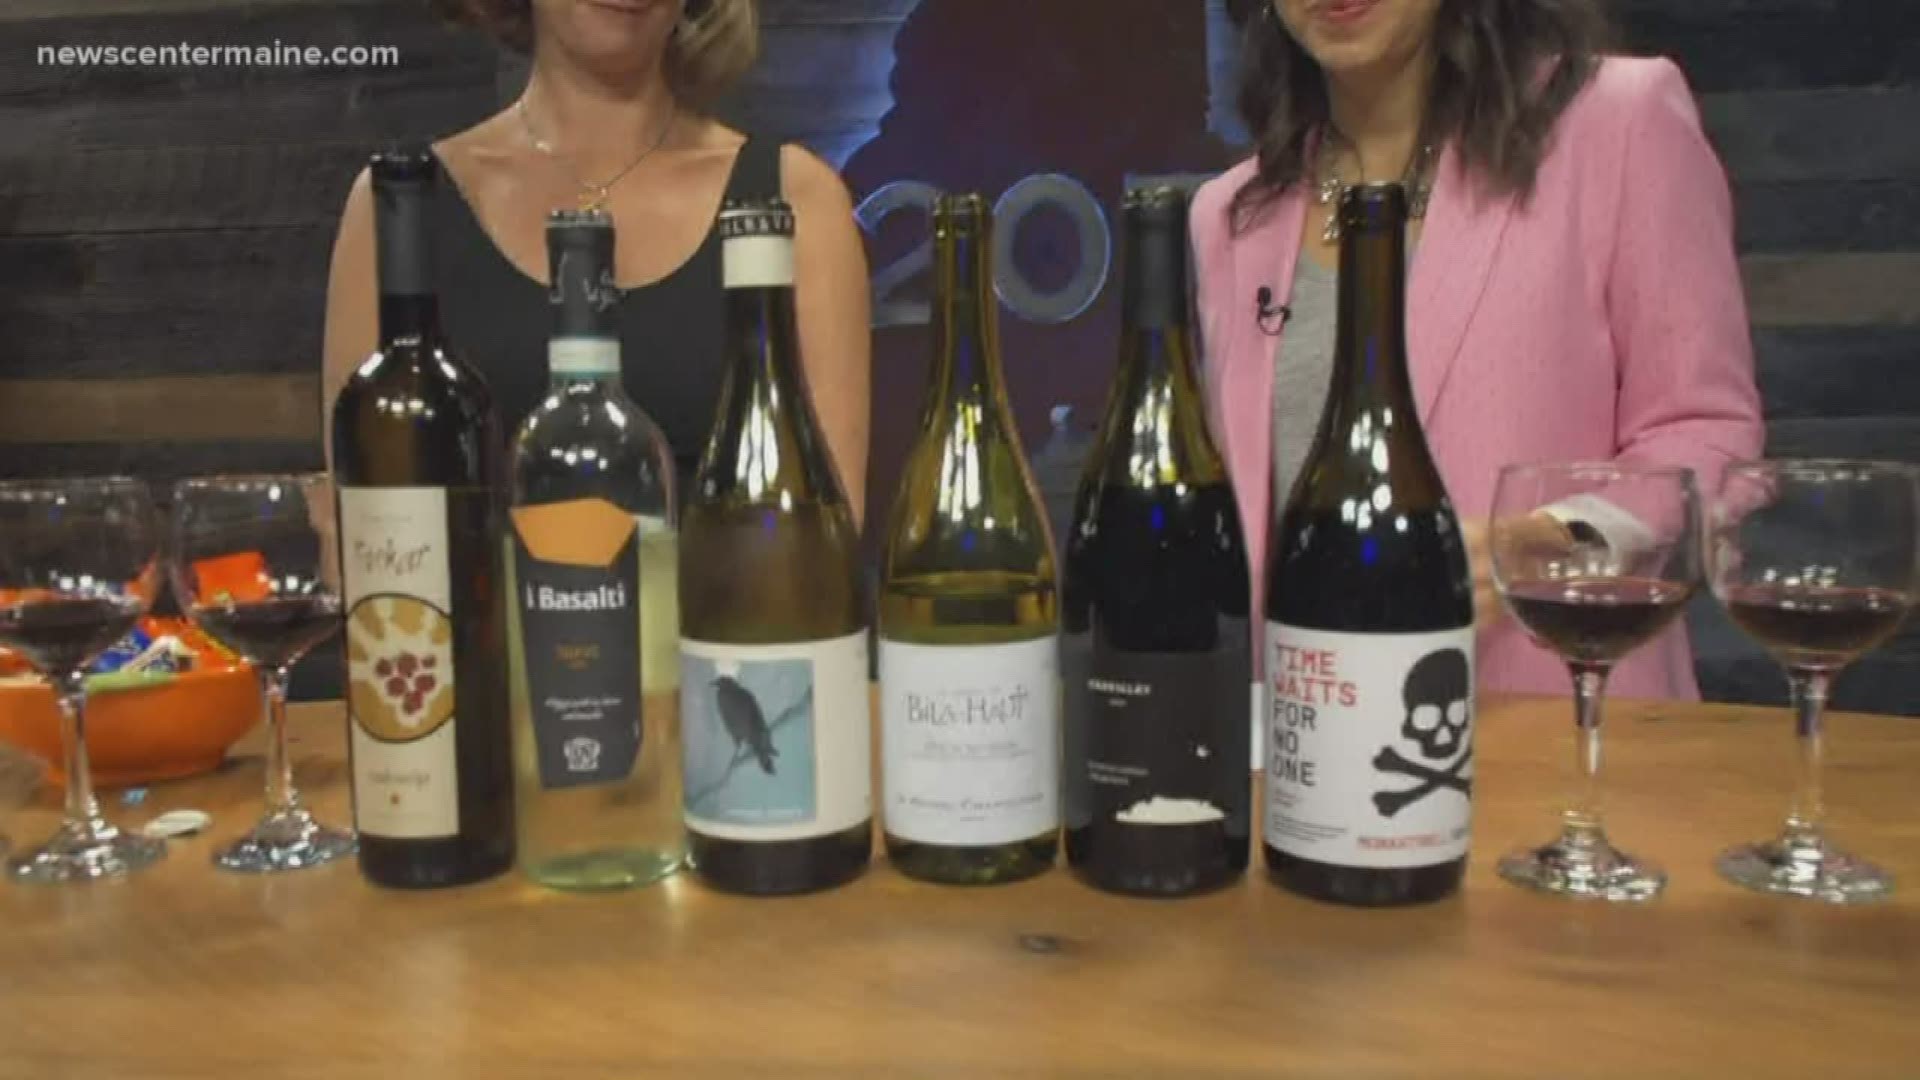 Maia is here with her autumn wine suggestions.